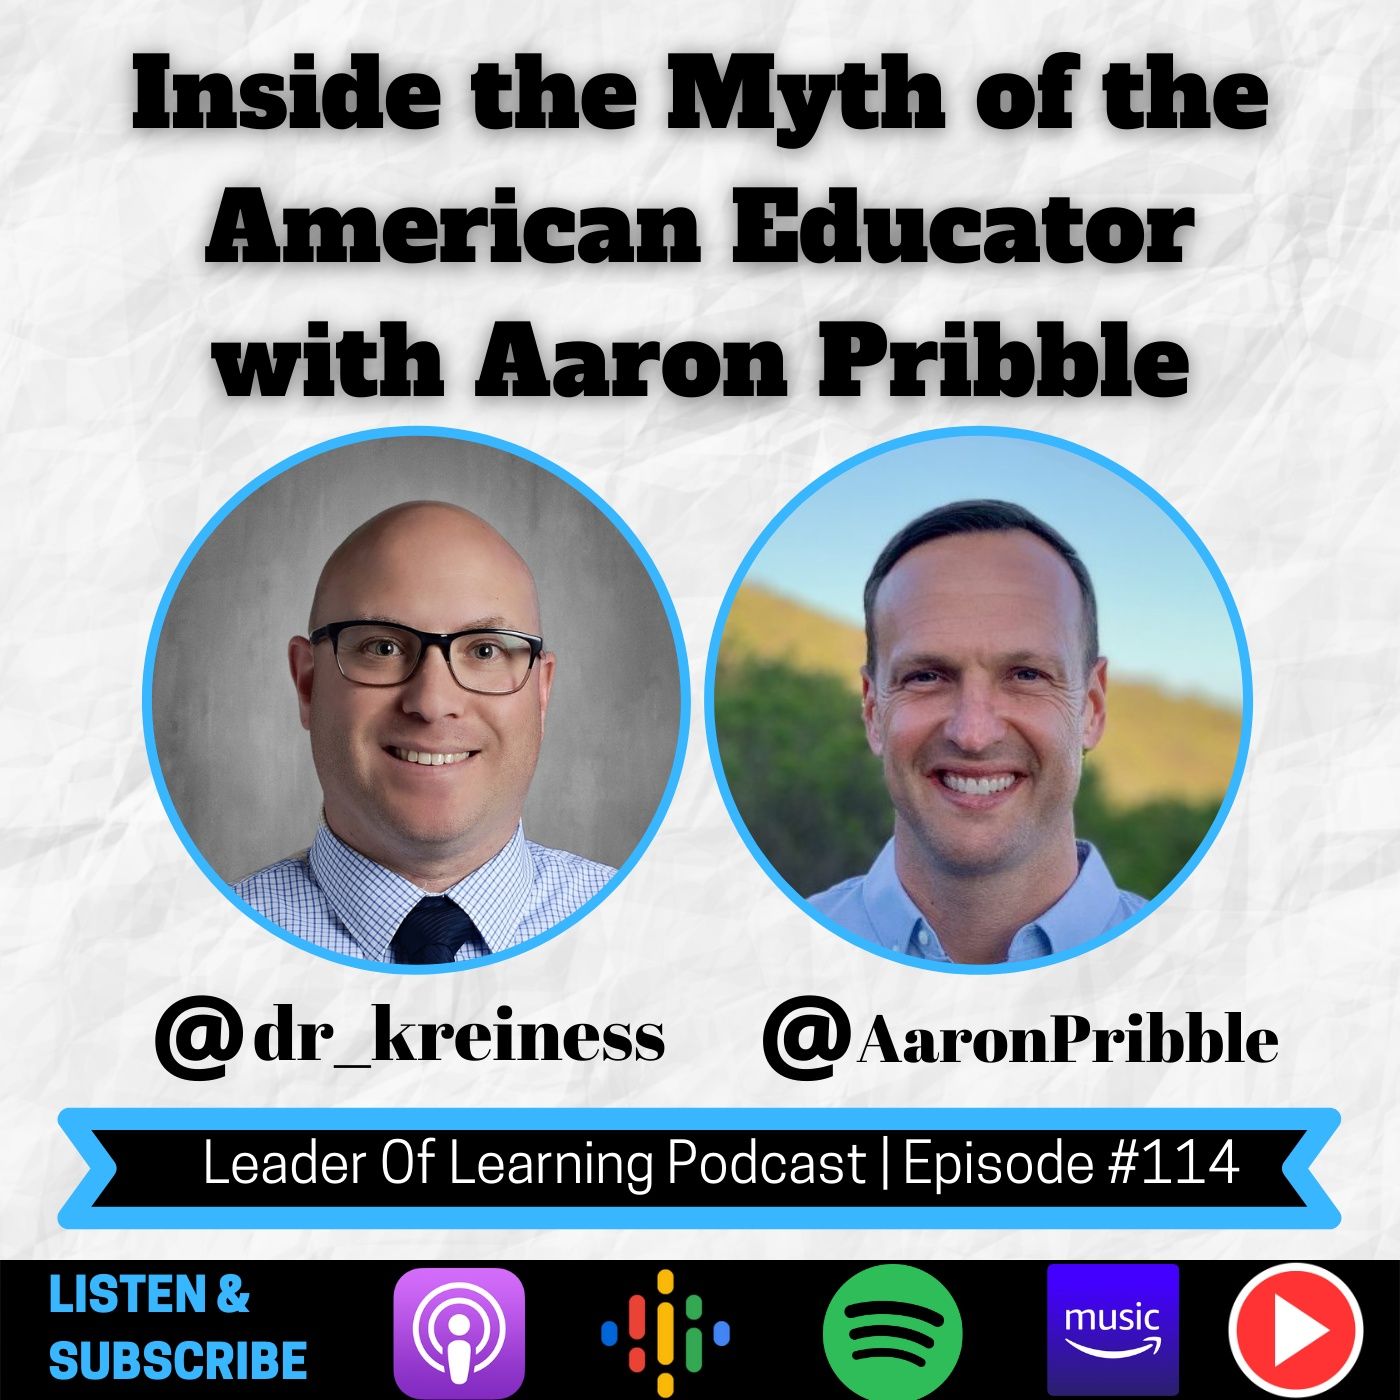 Inside the Myth of the American Educator Image